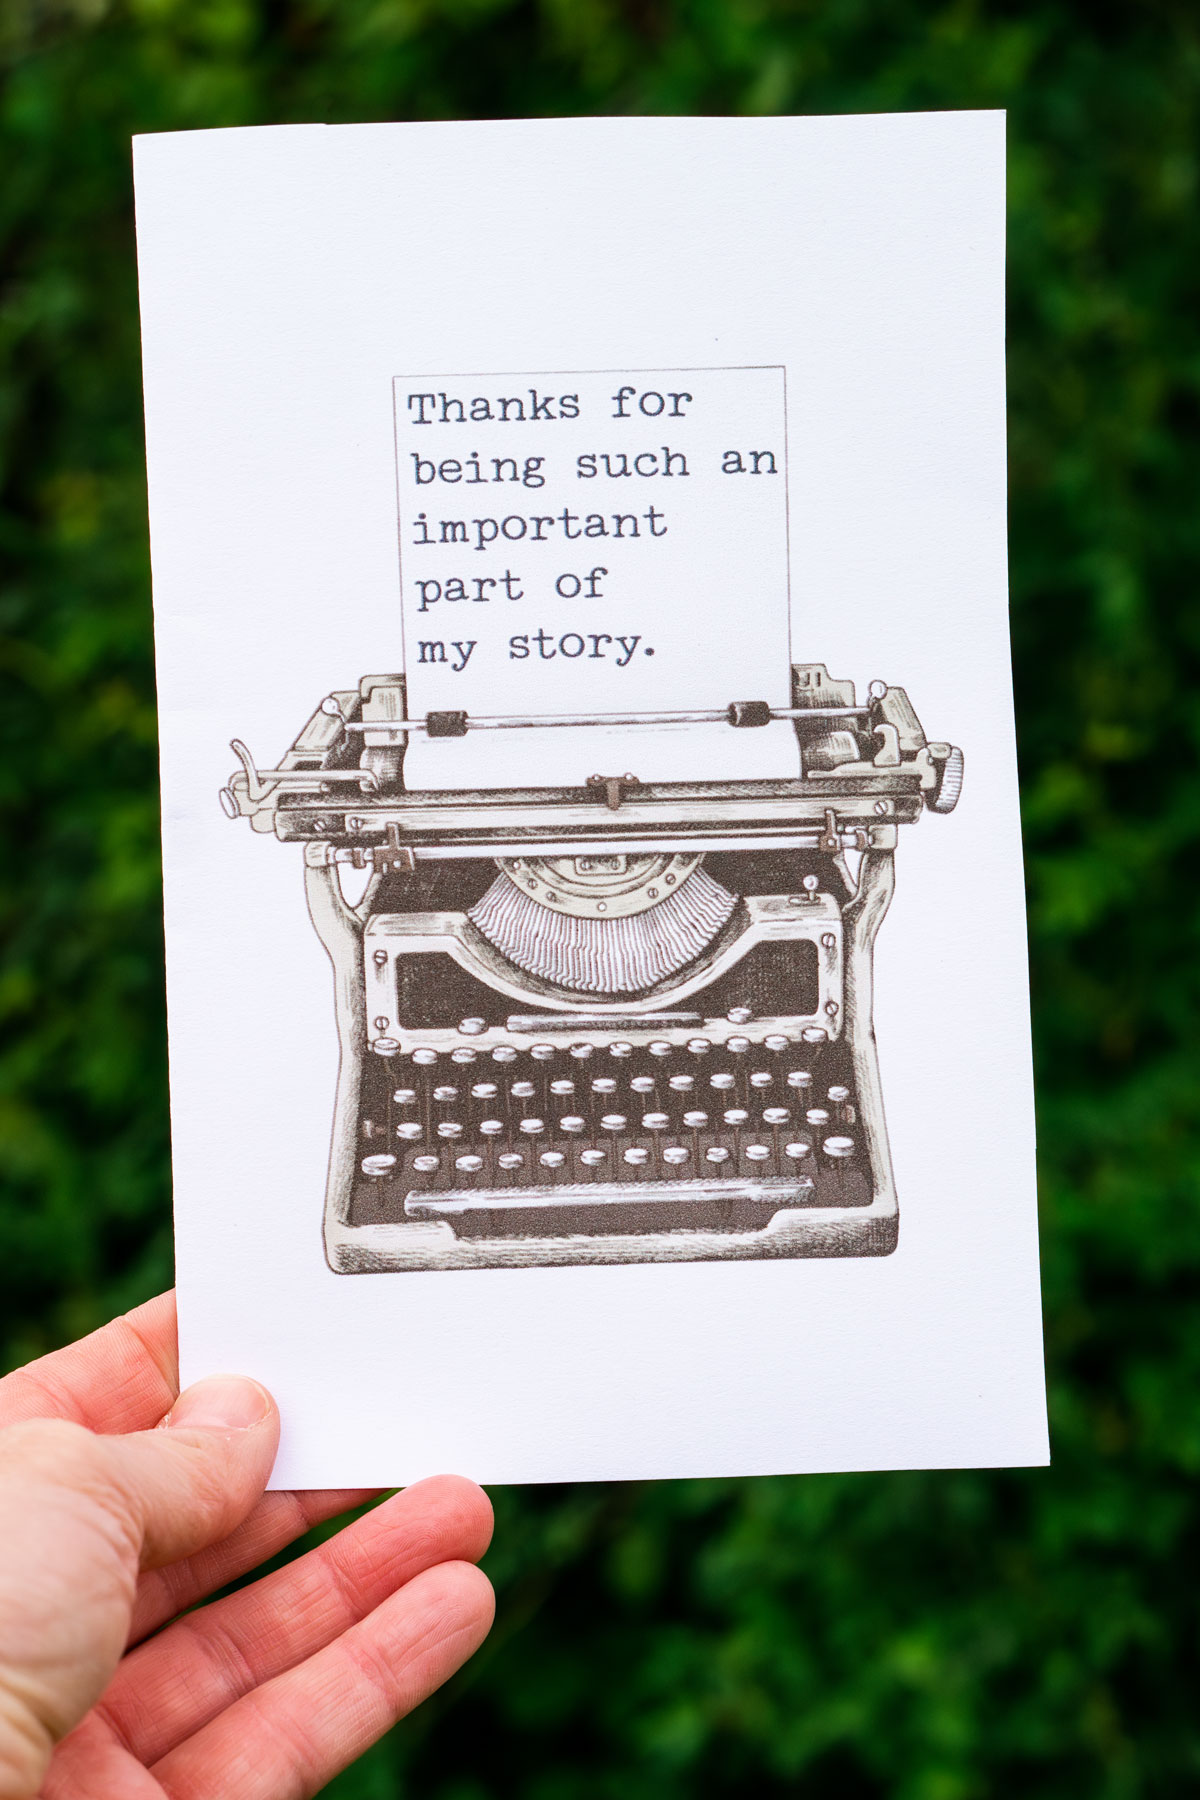 This image is of someone holding one of the free printable thank you cards for teacher appreciation or the end of the year. It says thank you for being an important part of my story and has a type writer.